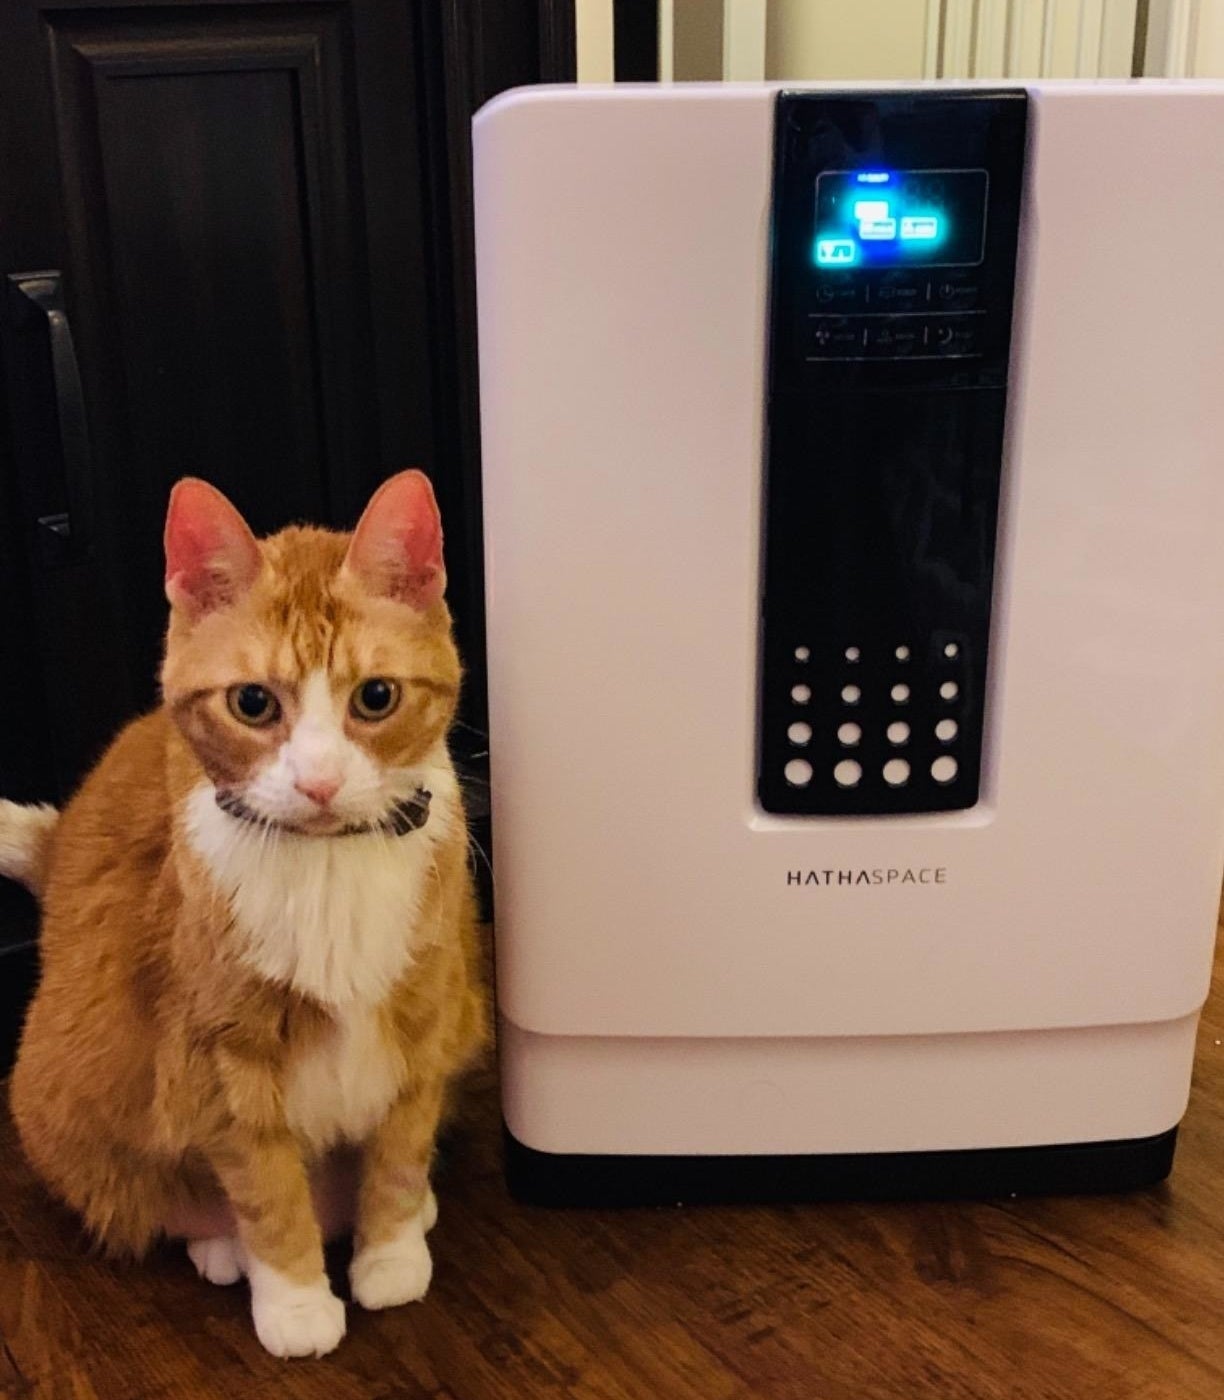 Tan and white cat sitting next to white air purifier with a lit-up digital screen